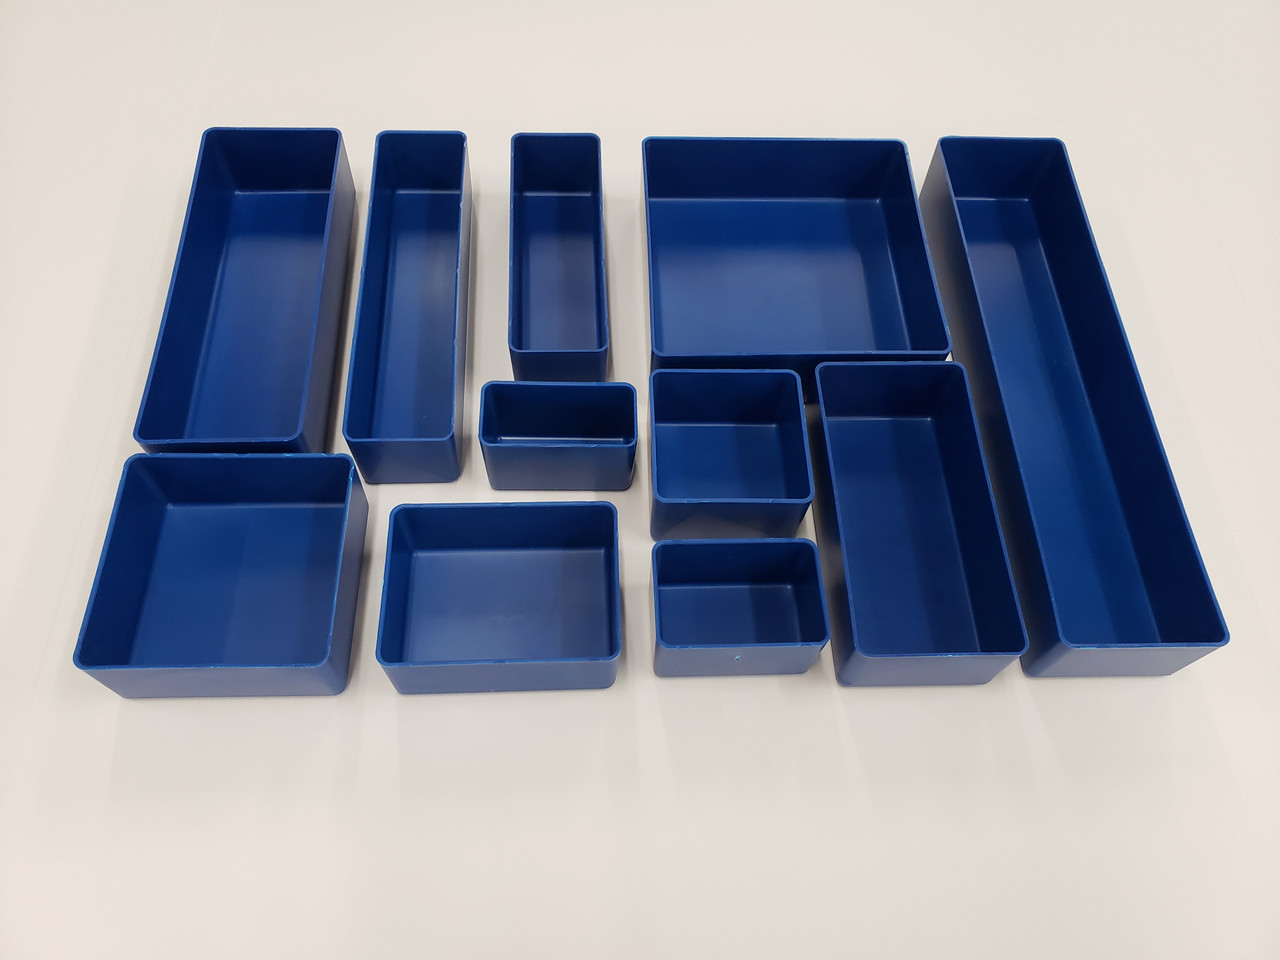 1 Deep, Red Plastic Box Sample Assortment (1 each of 10 sizes)